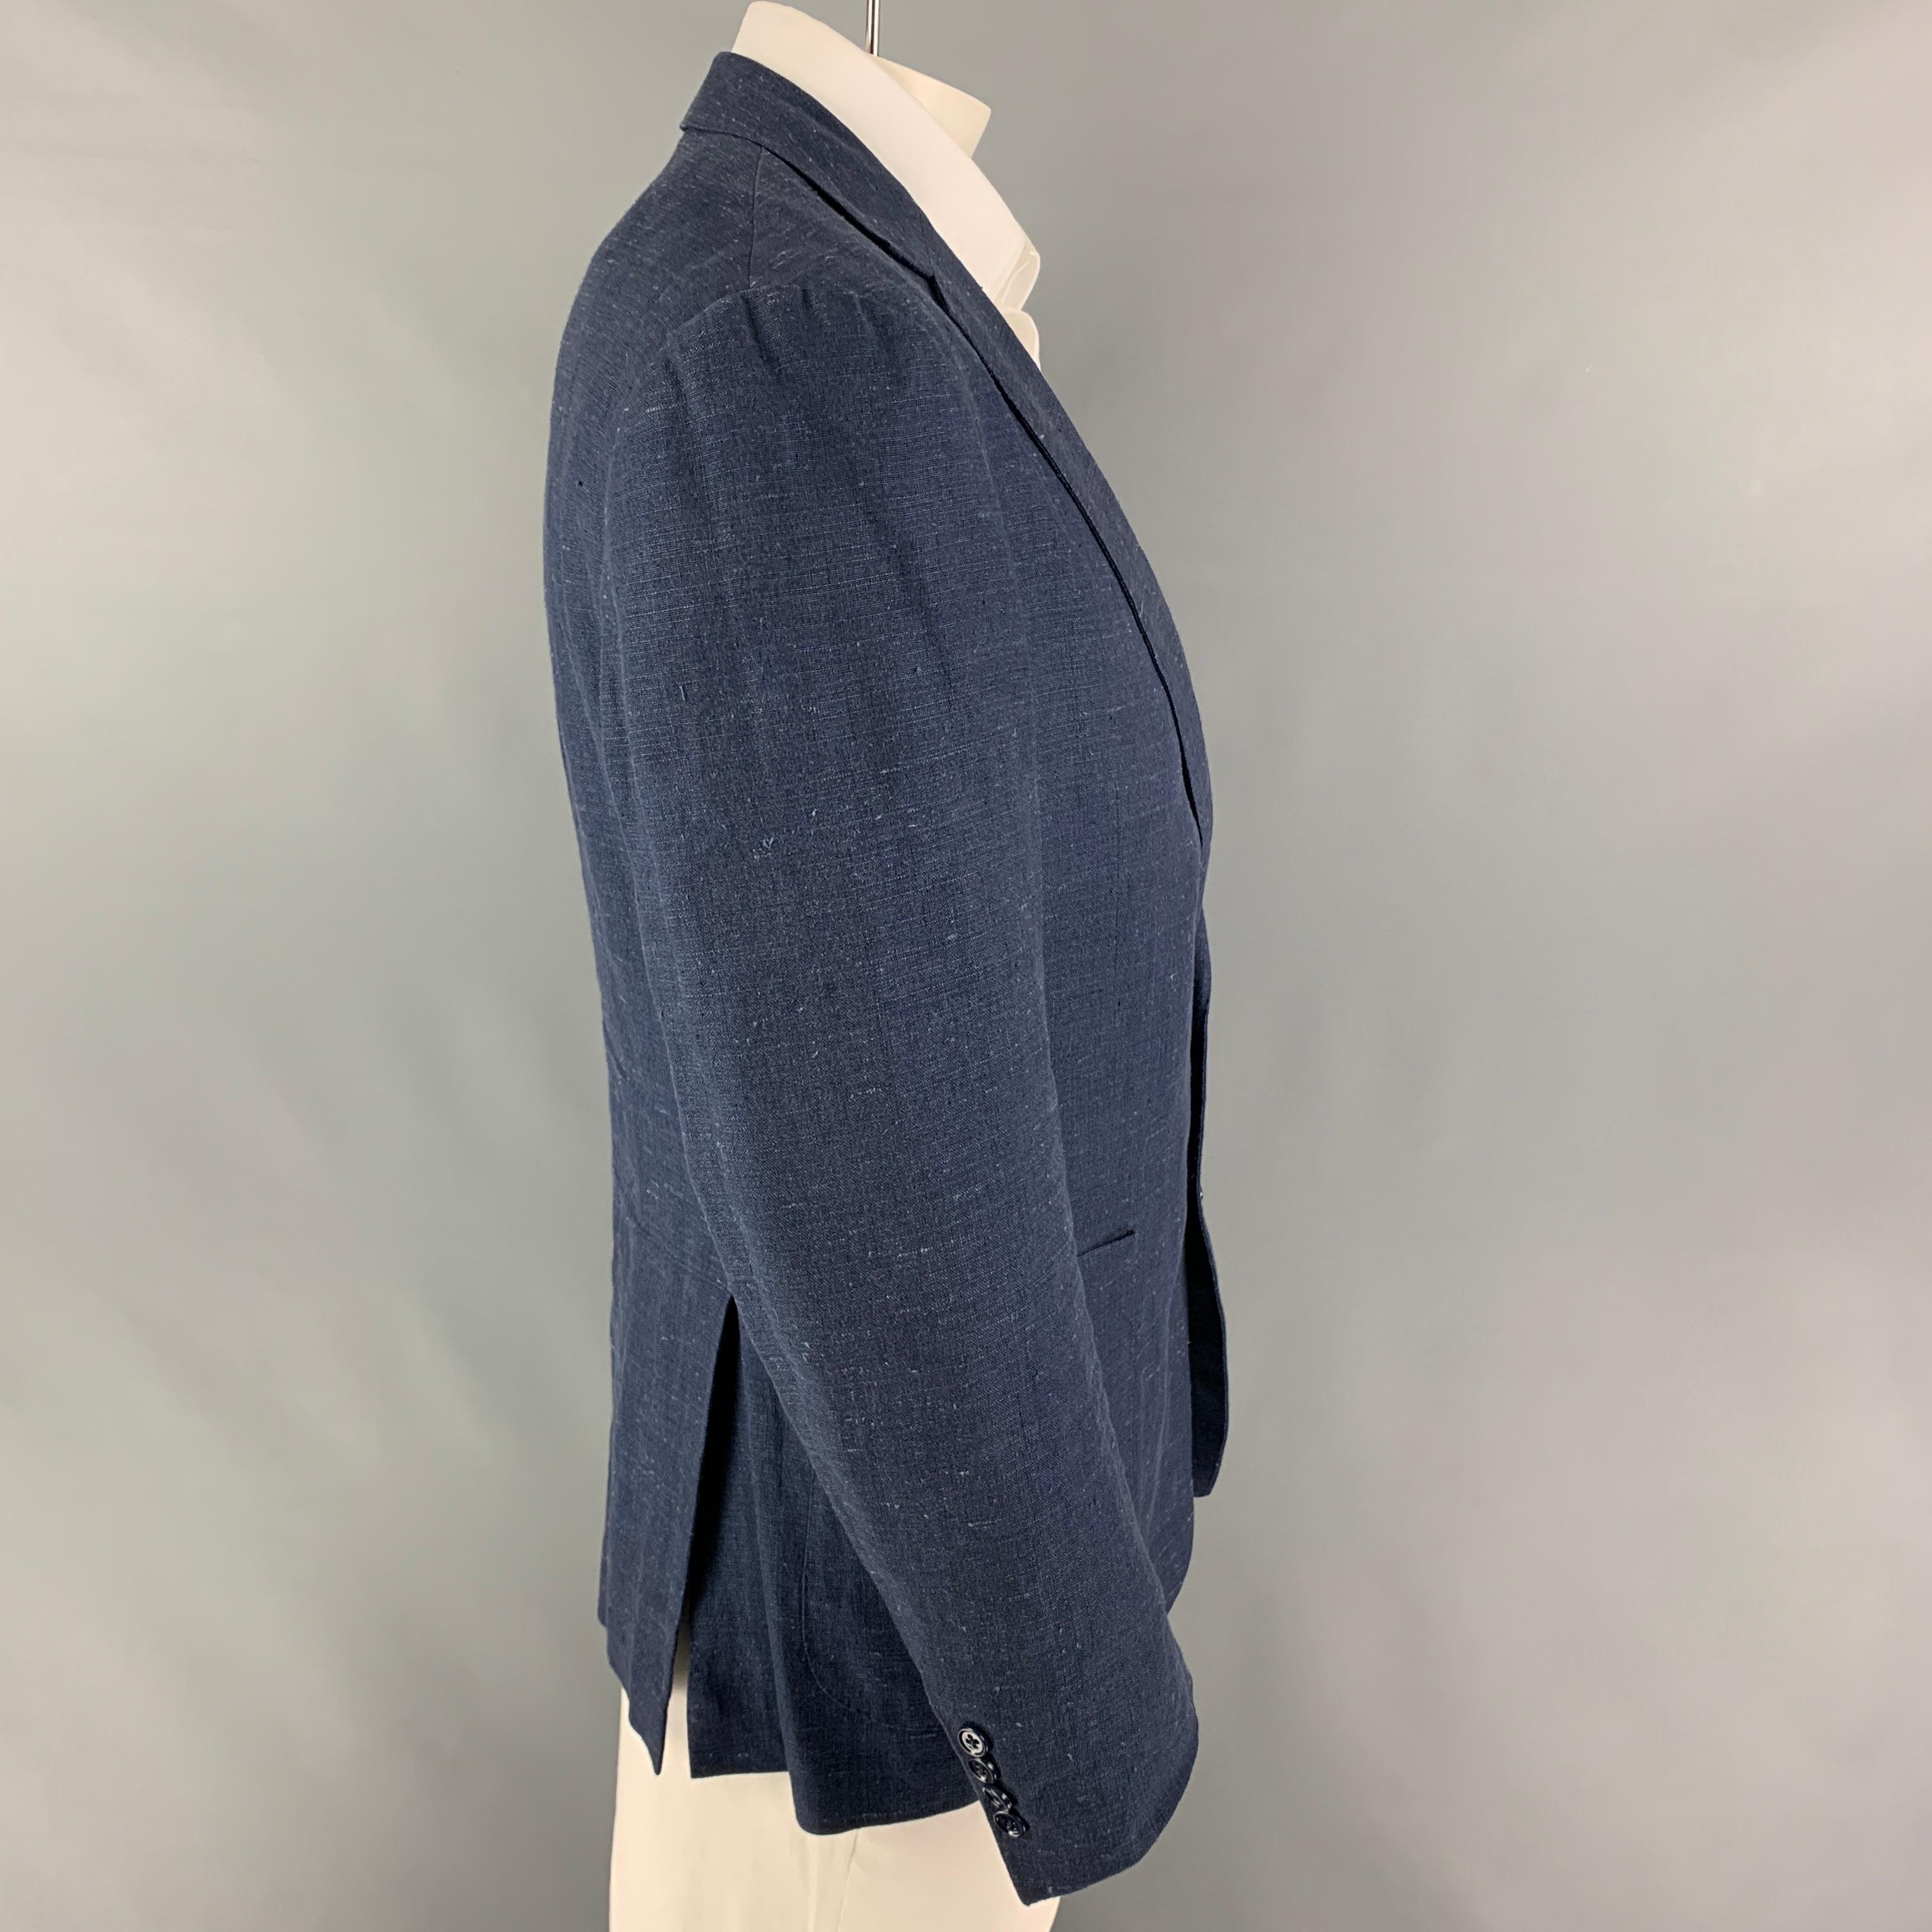 RALPH LAUREN 'Black Label' sport coat comes in a indigo textured linen / silk featuring a notch lapel, patch pockets, double back vent, and a double button closure. 

Very Good Pre-Owned Condition.
Marked: 44 R

Measurements:

Shoulder: 19